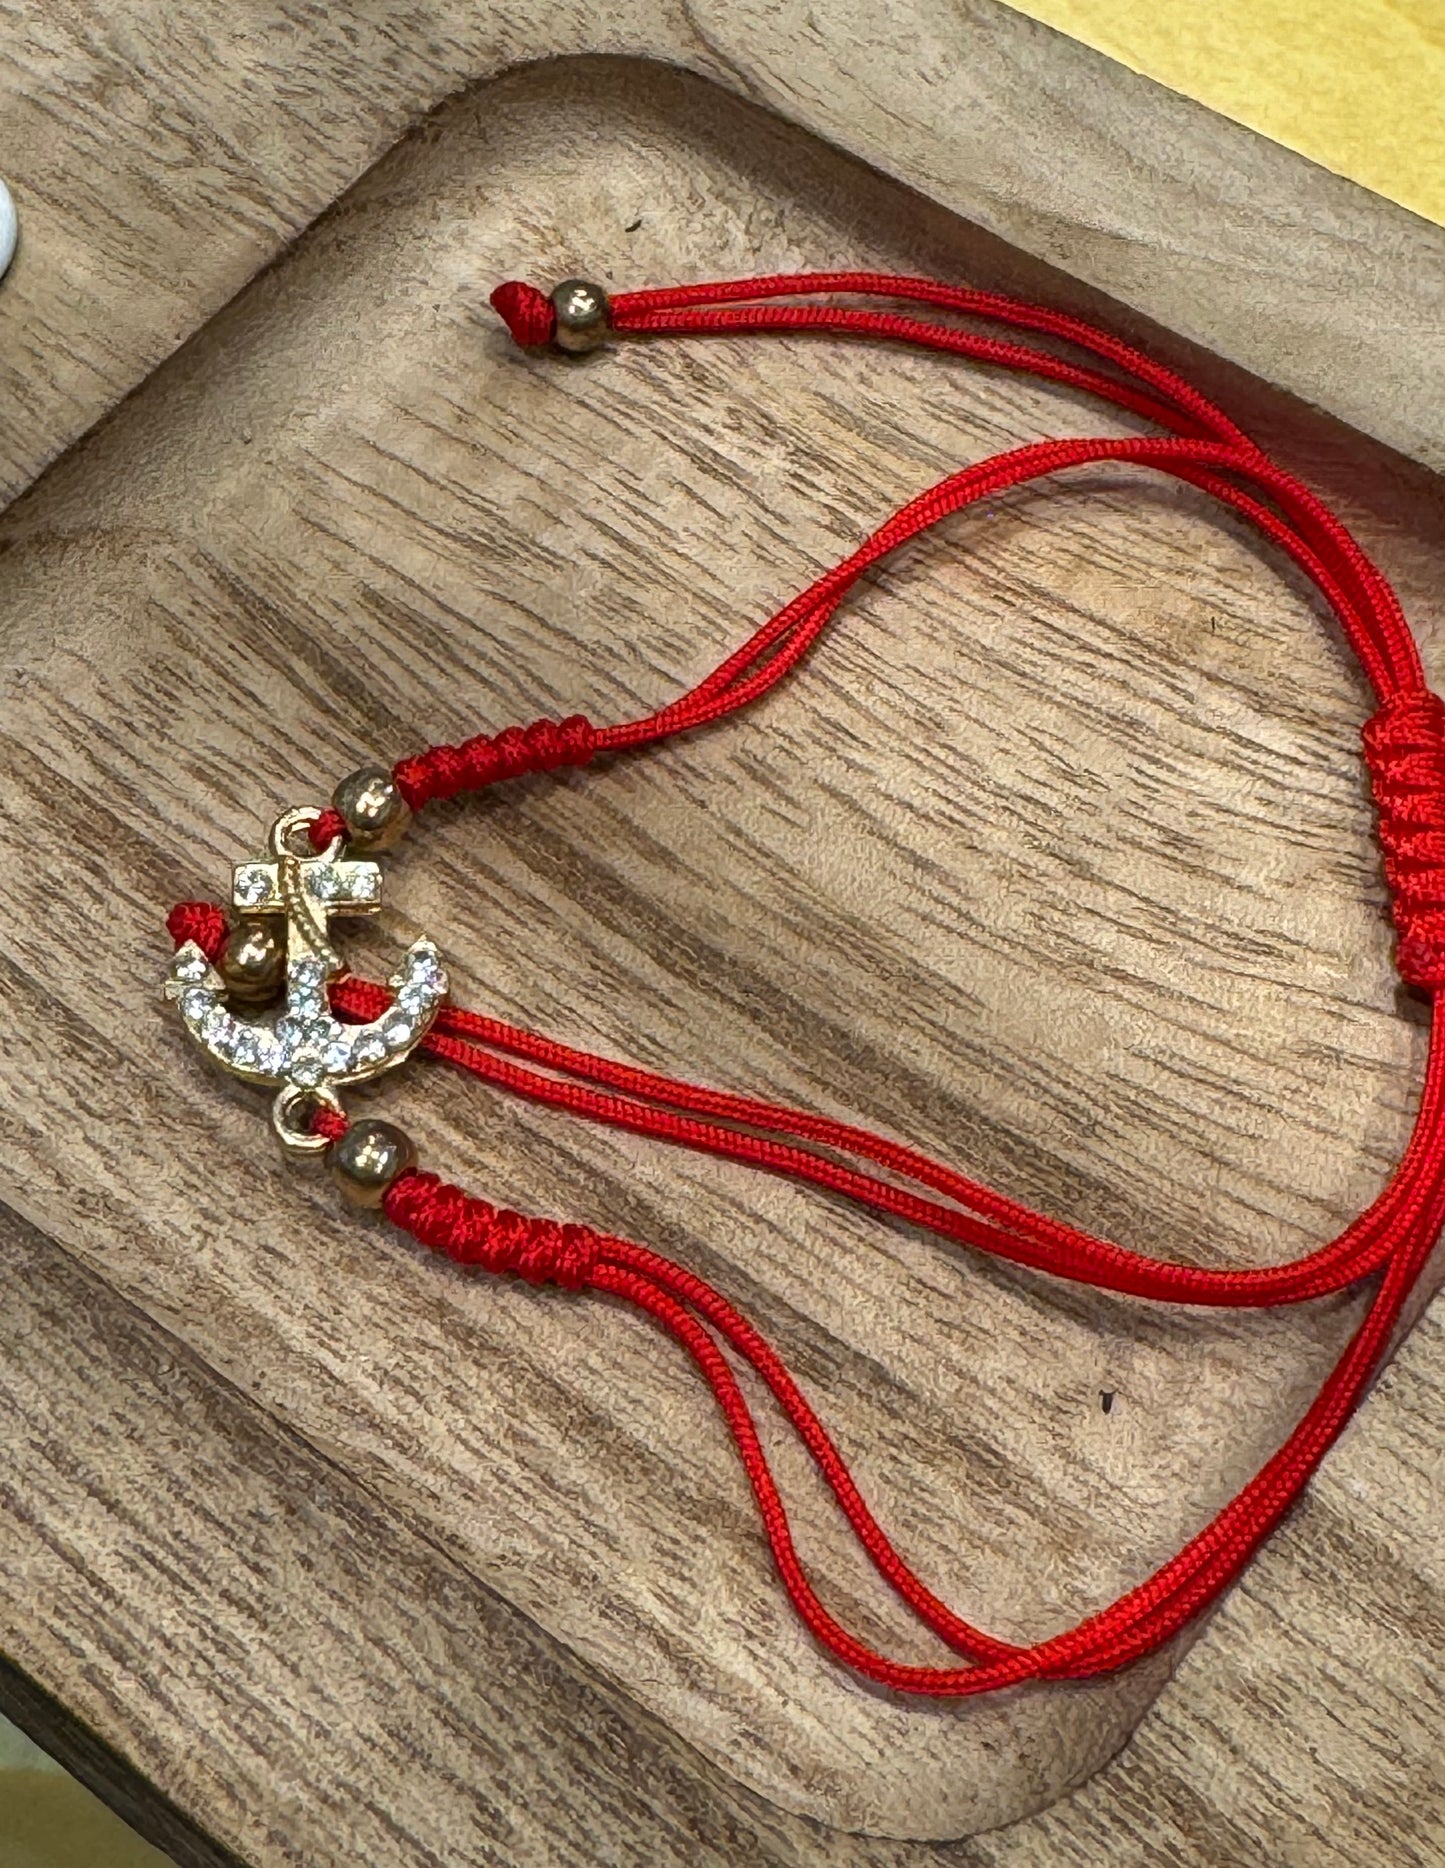 Red String Pull Tie Bracelet Rhinestone Anchor Charm and Golden Beads